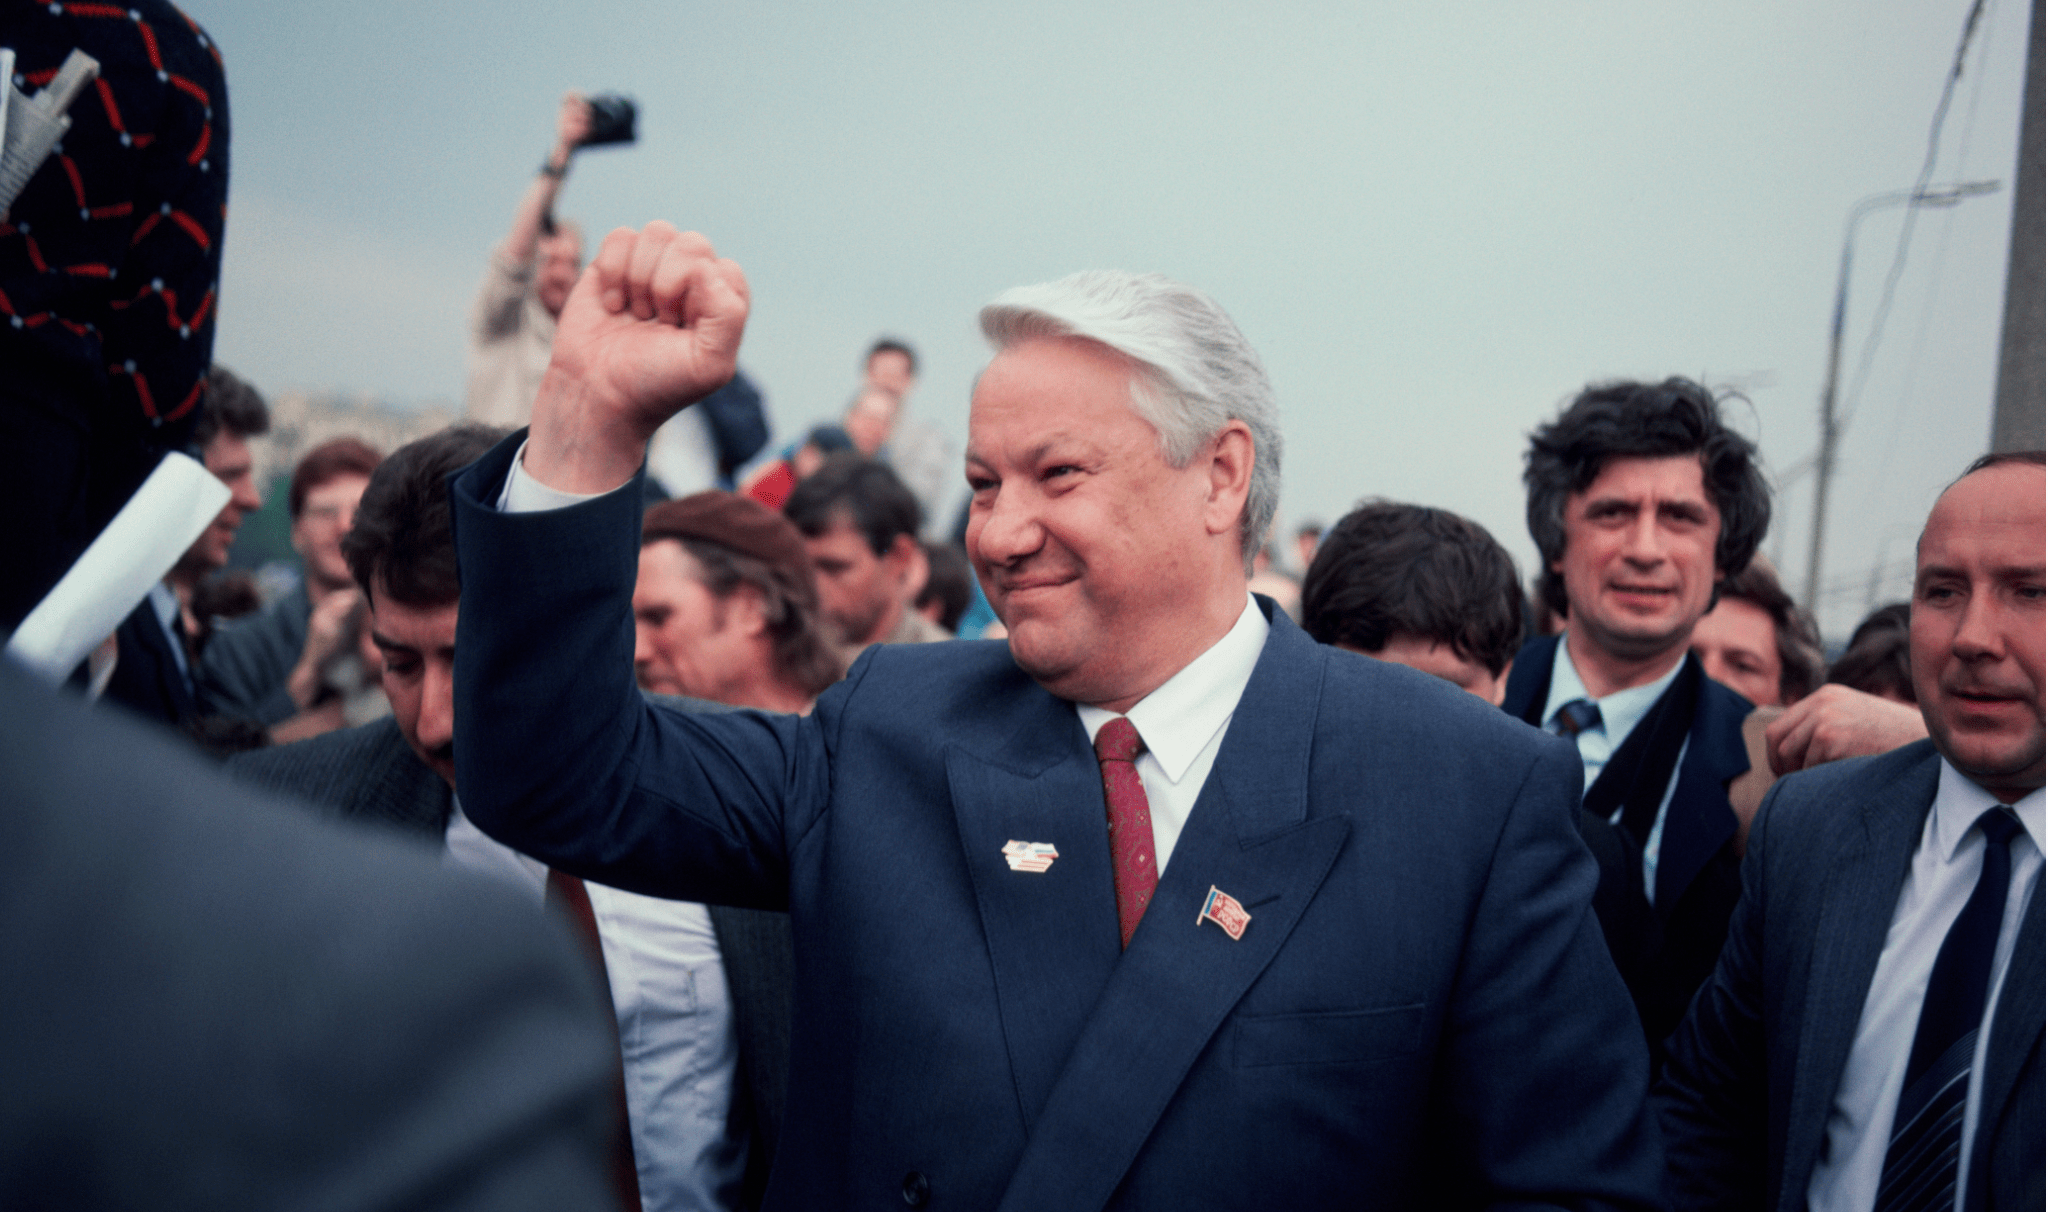 Revealed: Boris Yeltsin privately supported NATO expansion in 1990’s